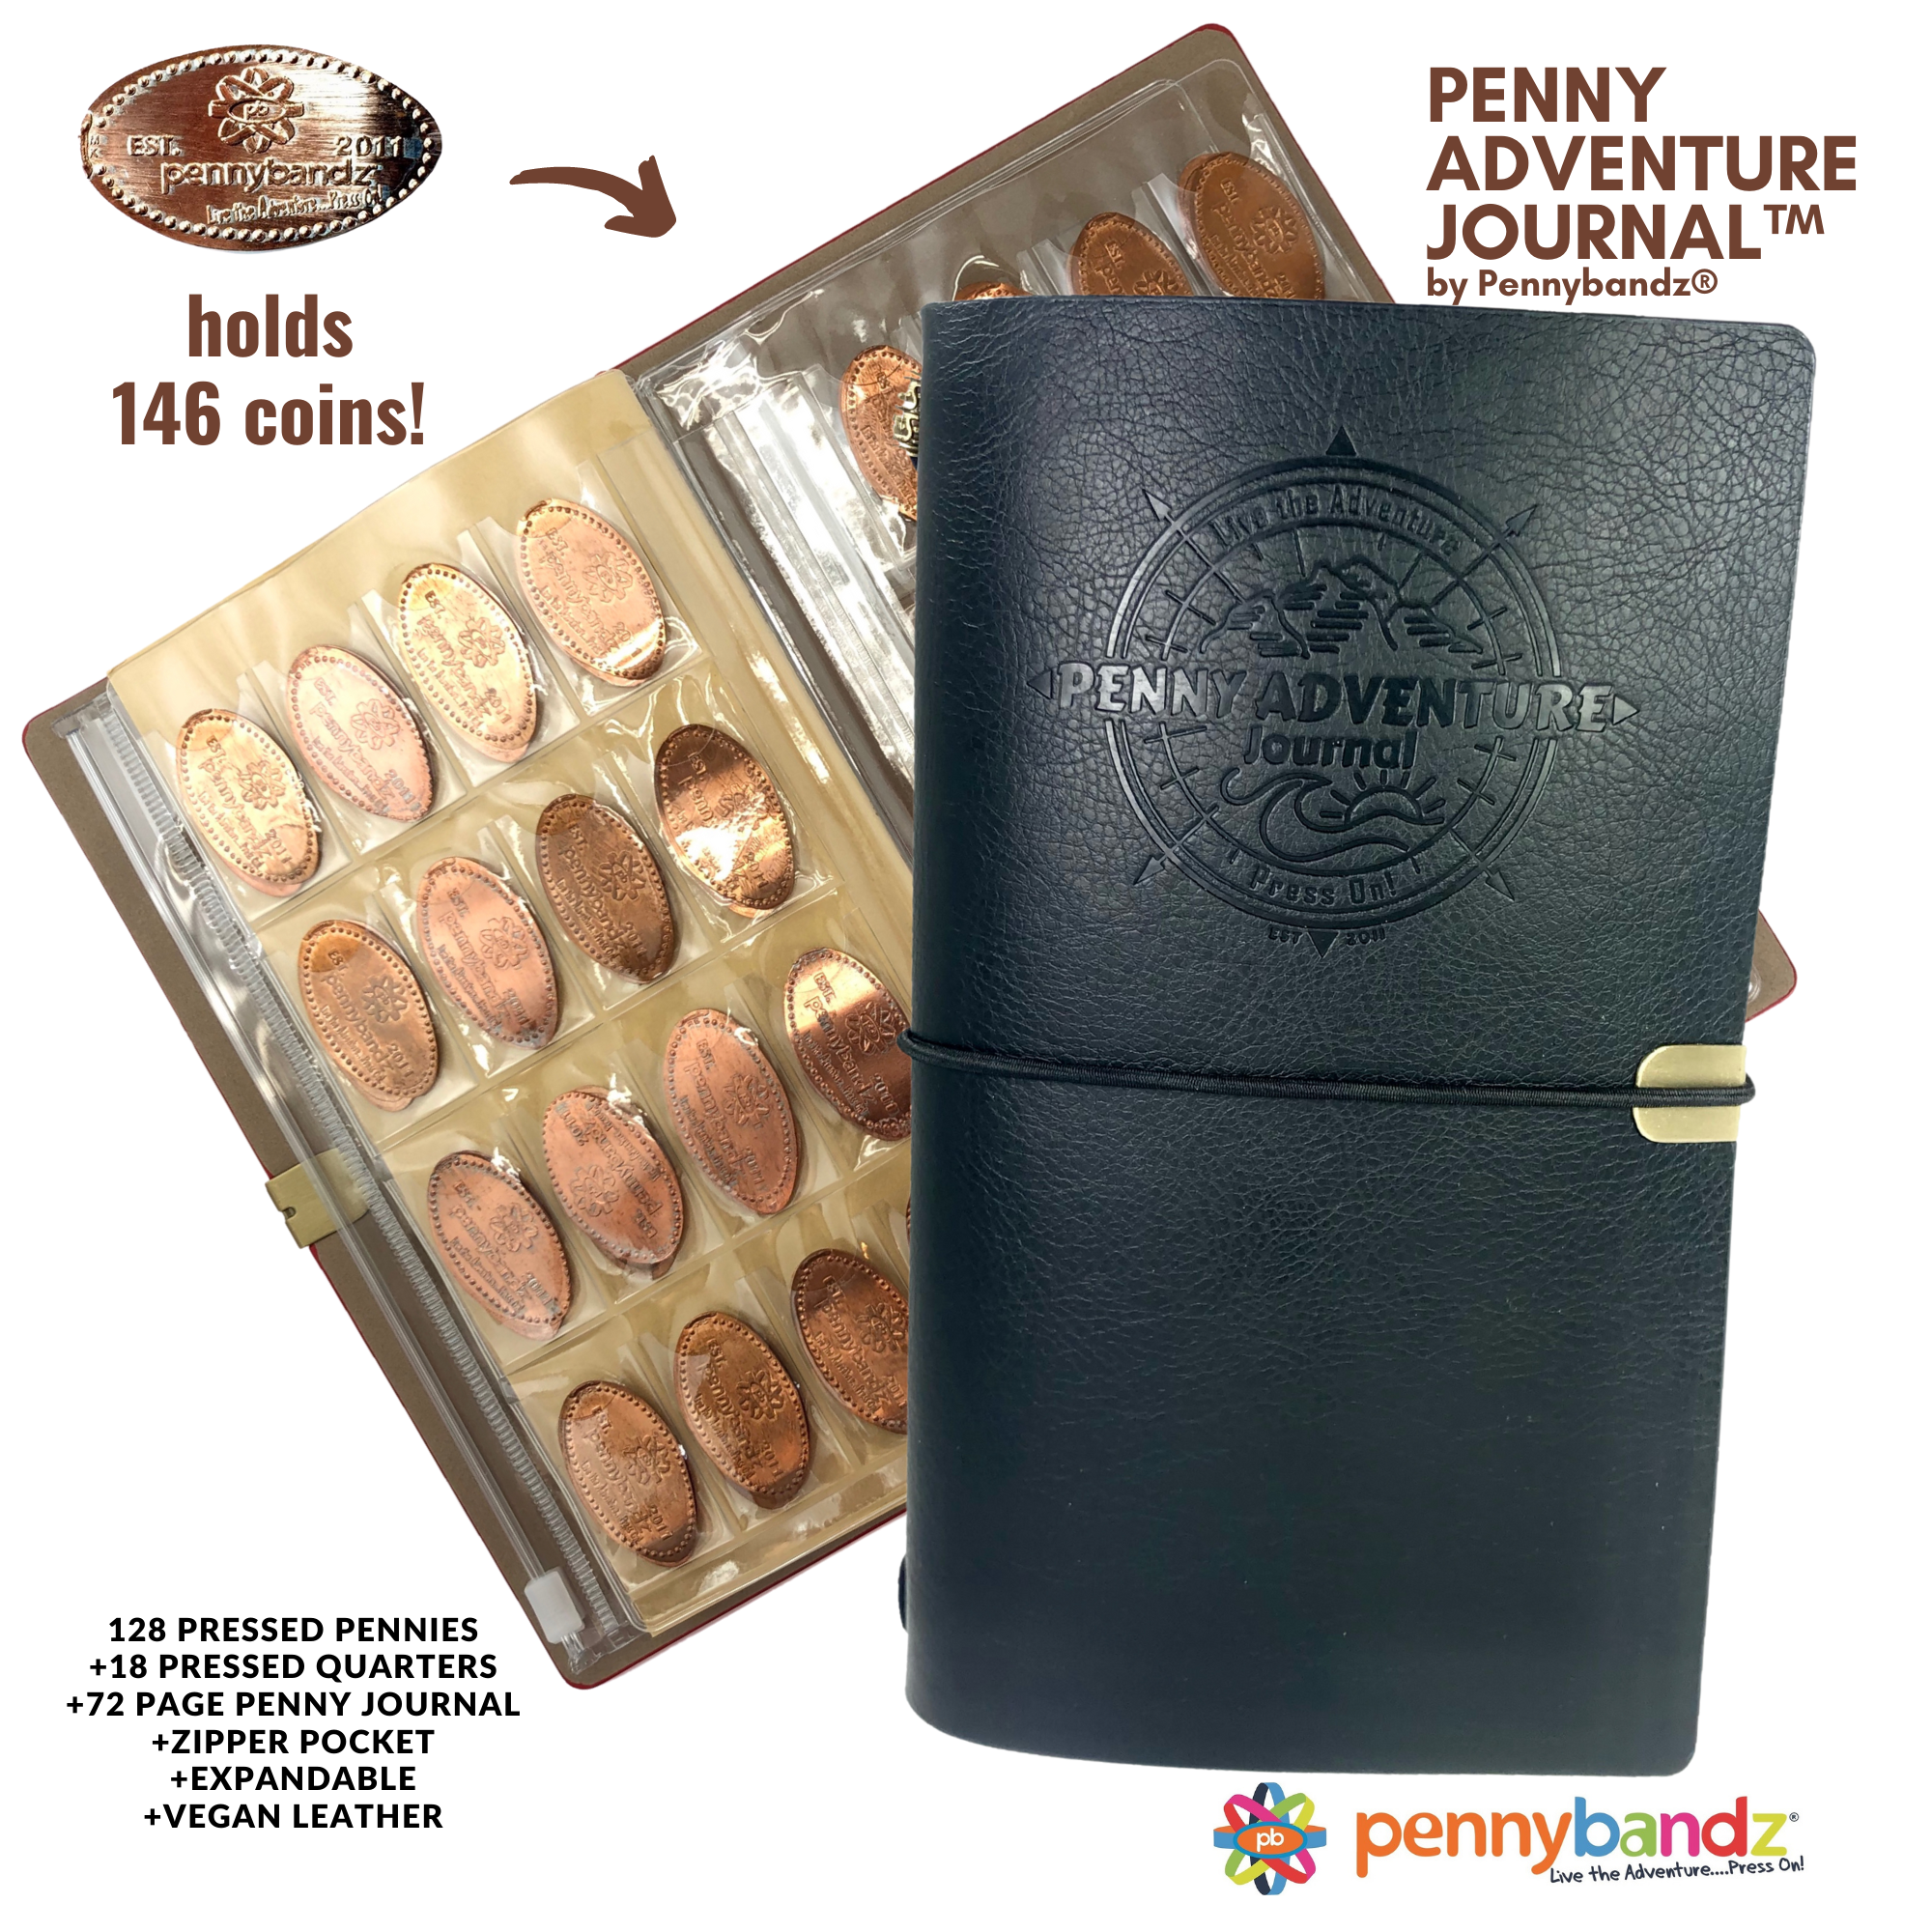  Pennybandz Press Penny Collector Tri-Fold Album - Holds 48  Souvenir Pressed Pennies - Vegan Leather - Every Book Ordered Comes with a  Mystery Penny as a Gift (Great American Penny Adventure) 